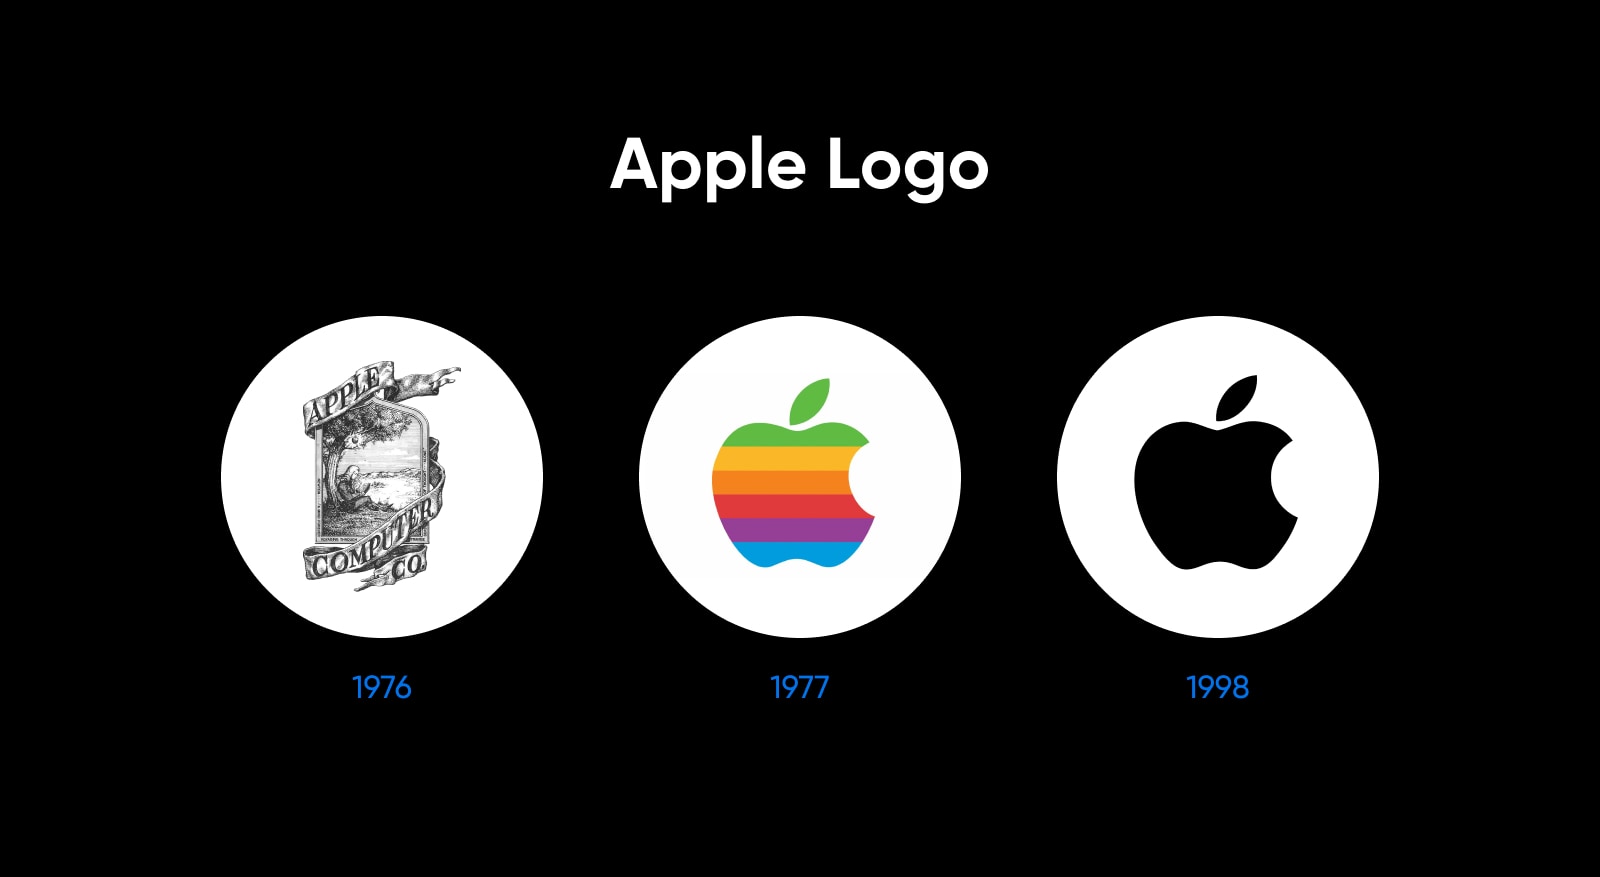 three iterations of the apple logo from 1976 (black and white picture of a tree with a banner) 1977 rainbow color apply and 1998 black apple on white circle background